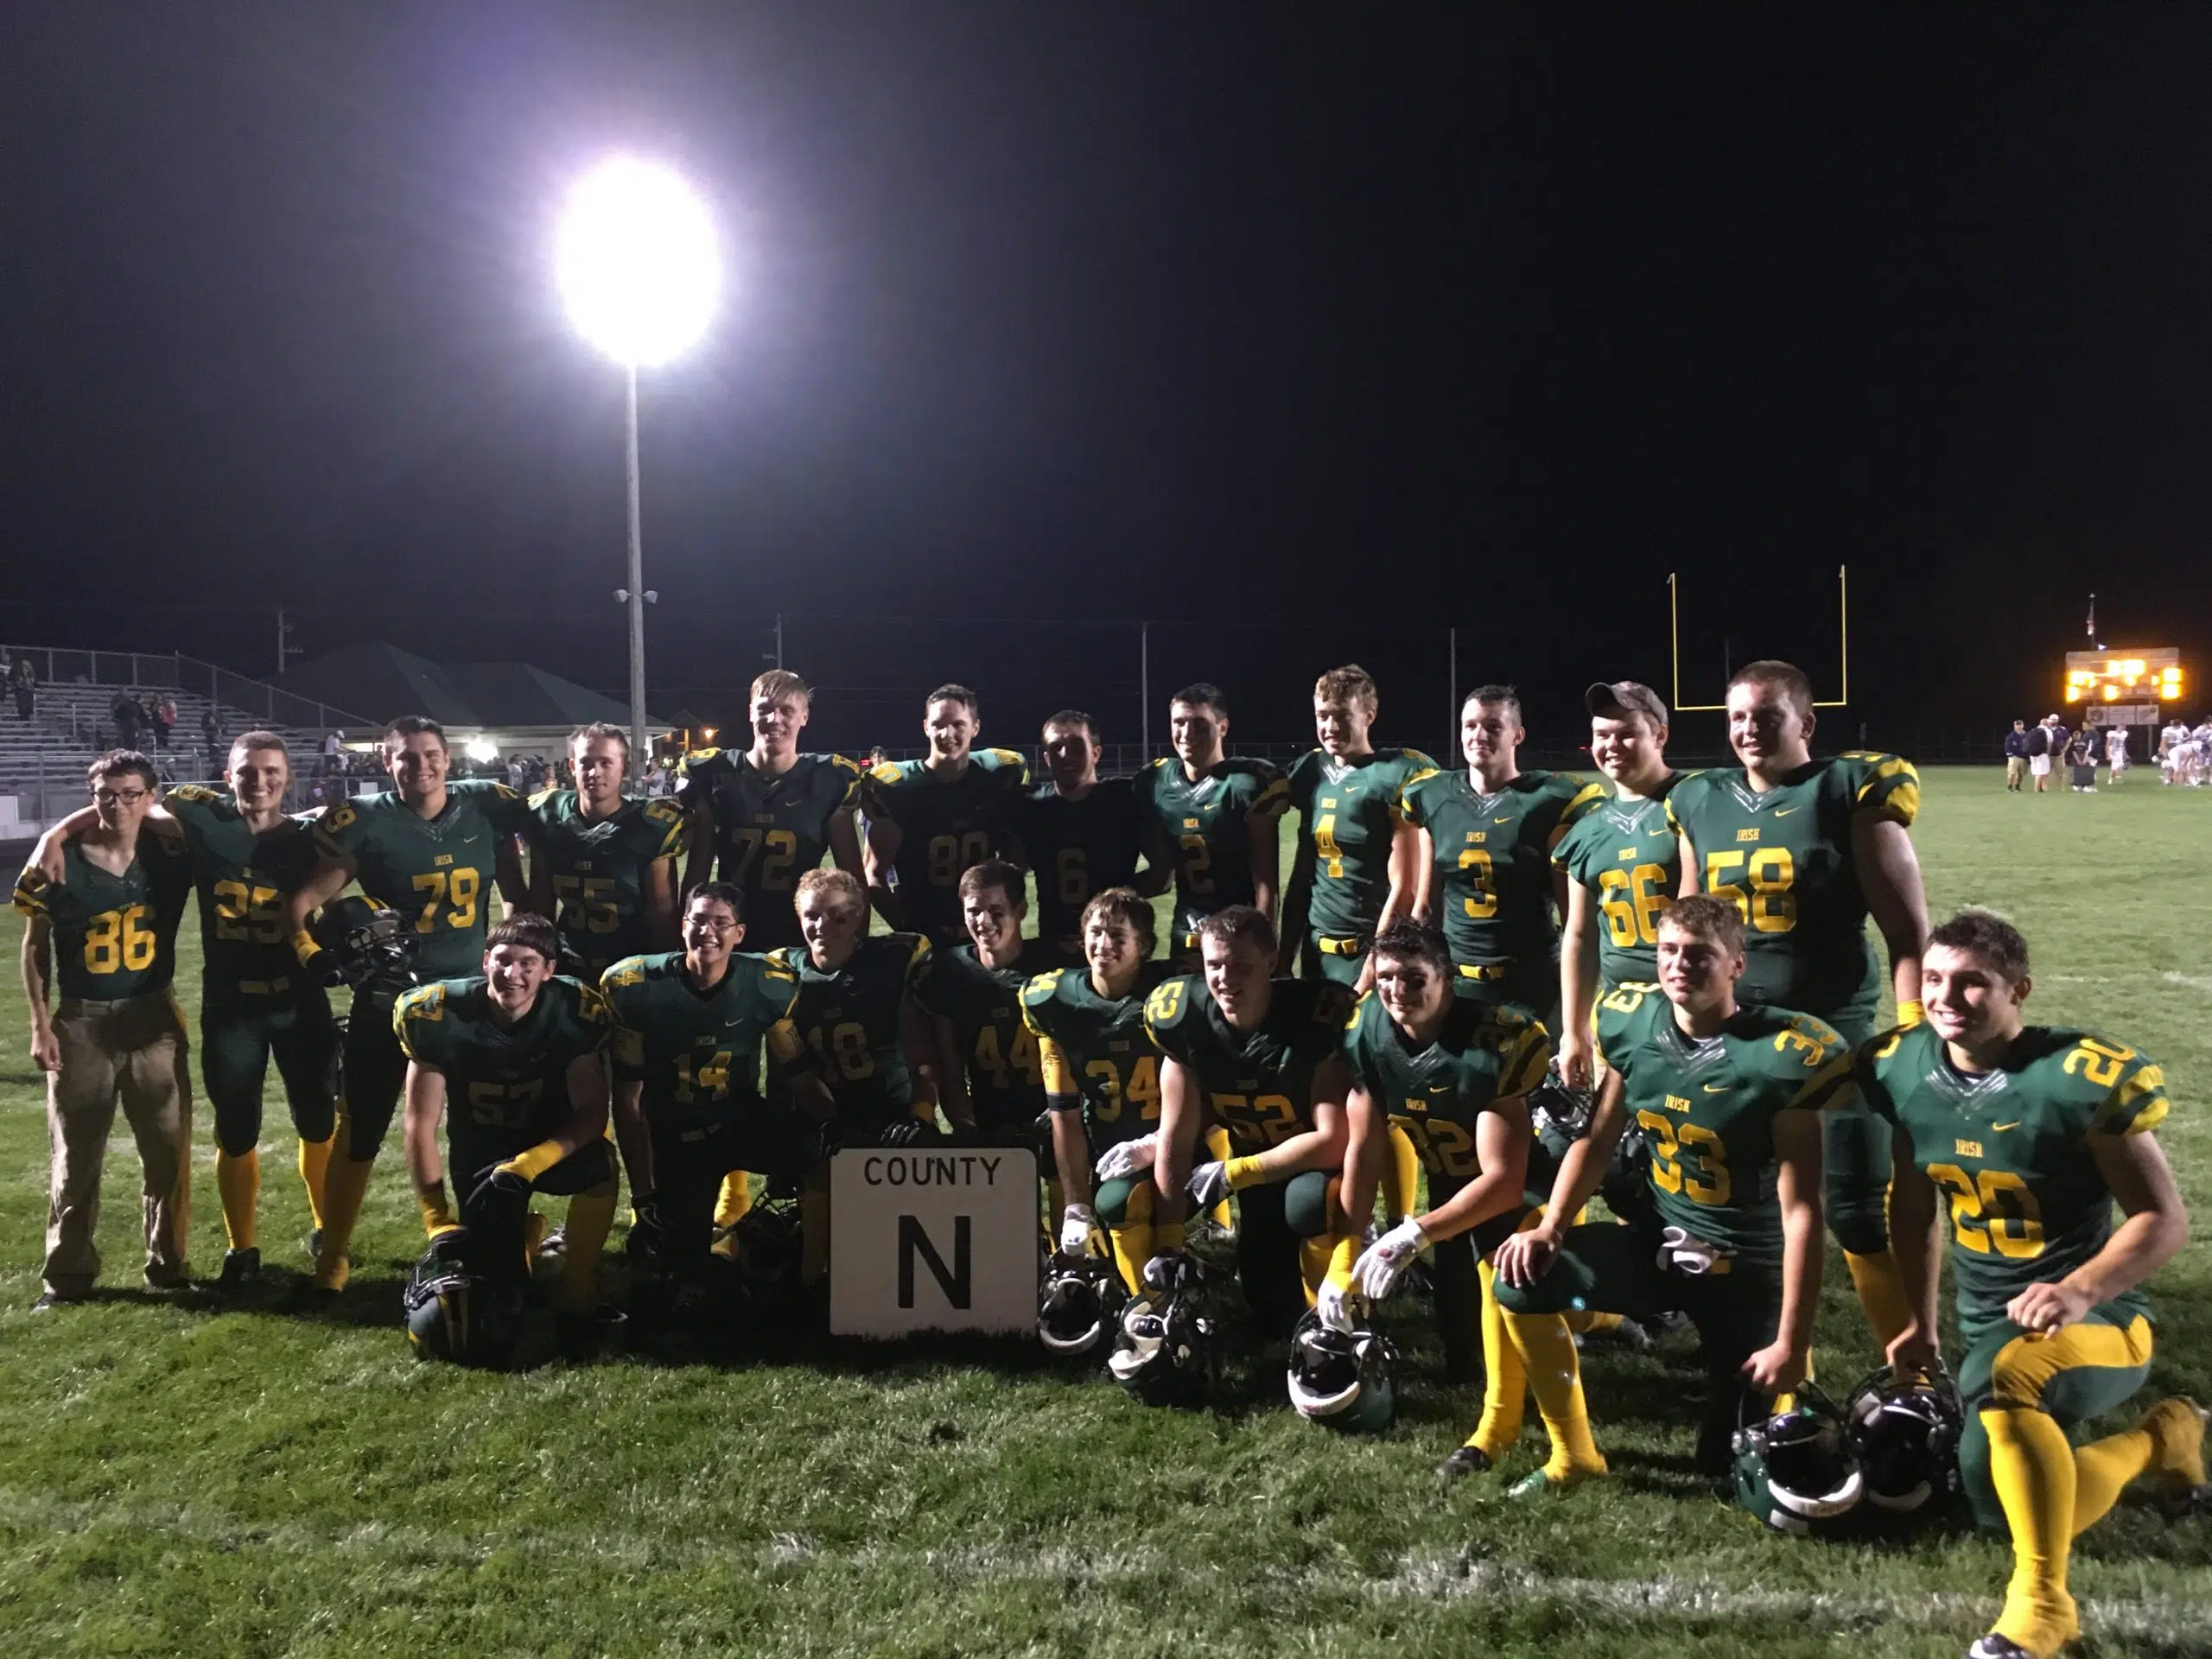 Freedom avenges playoff loss, County Highway "N" goes back to the Irish